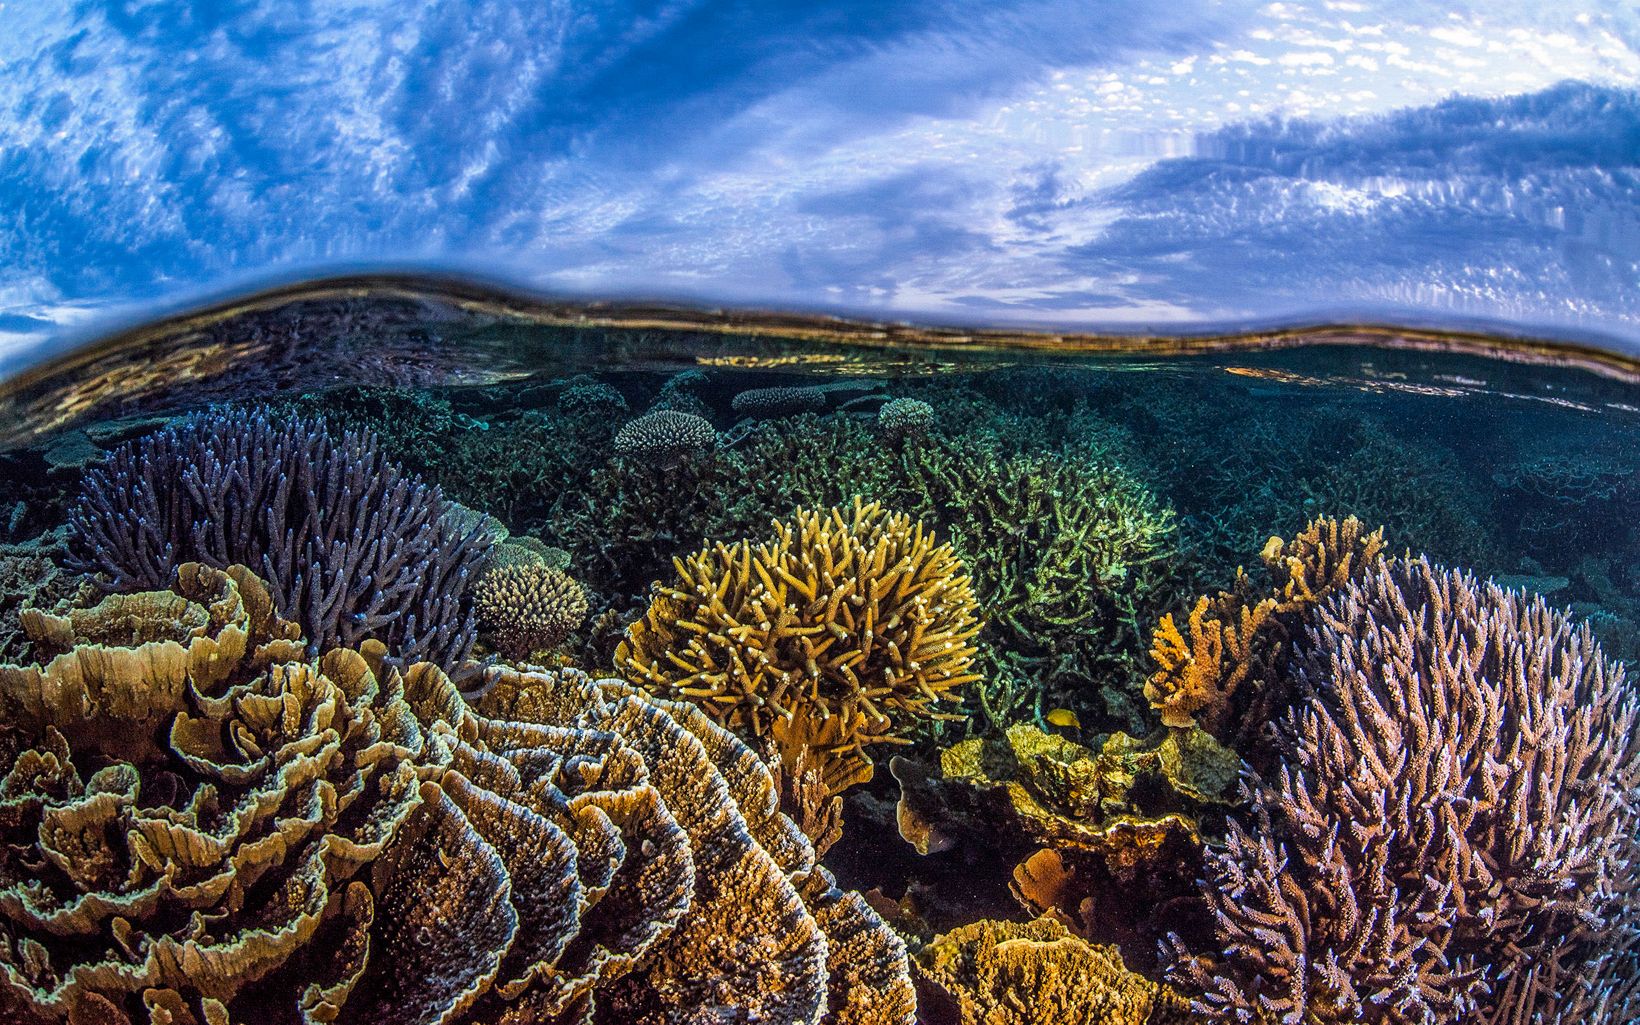 Coral reef in Australia Under a business-as-usual scenario, the world’s reefs will likely be gone by 2100. © Alex Kydd/TNC Photo Contest 2019